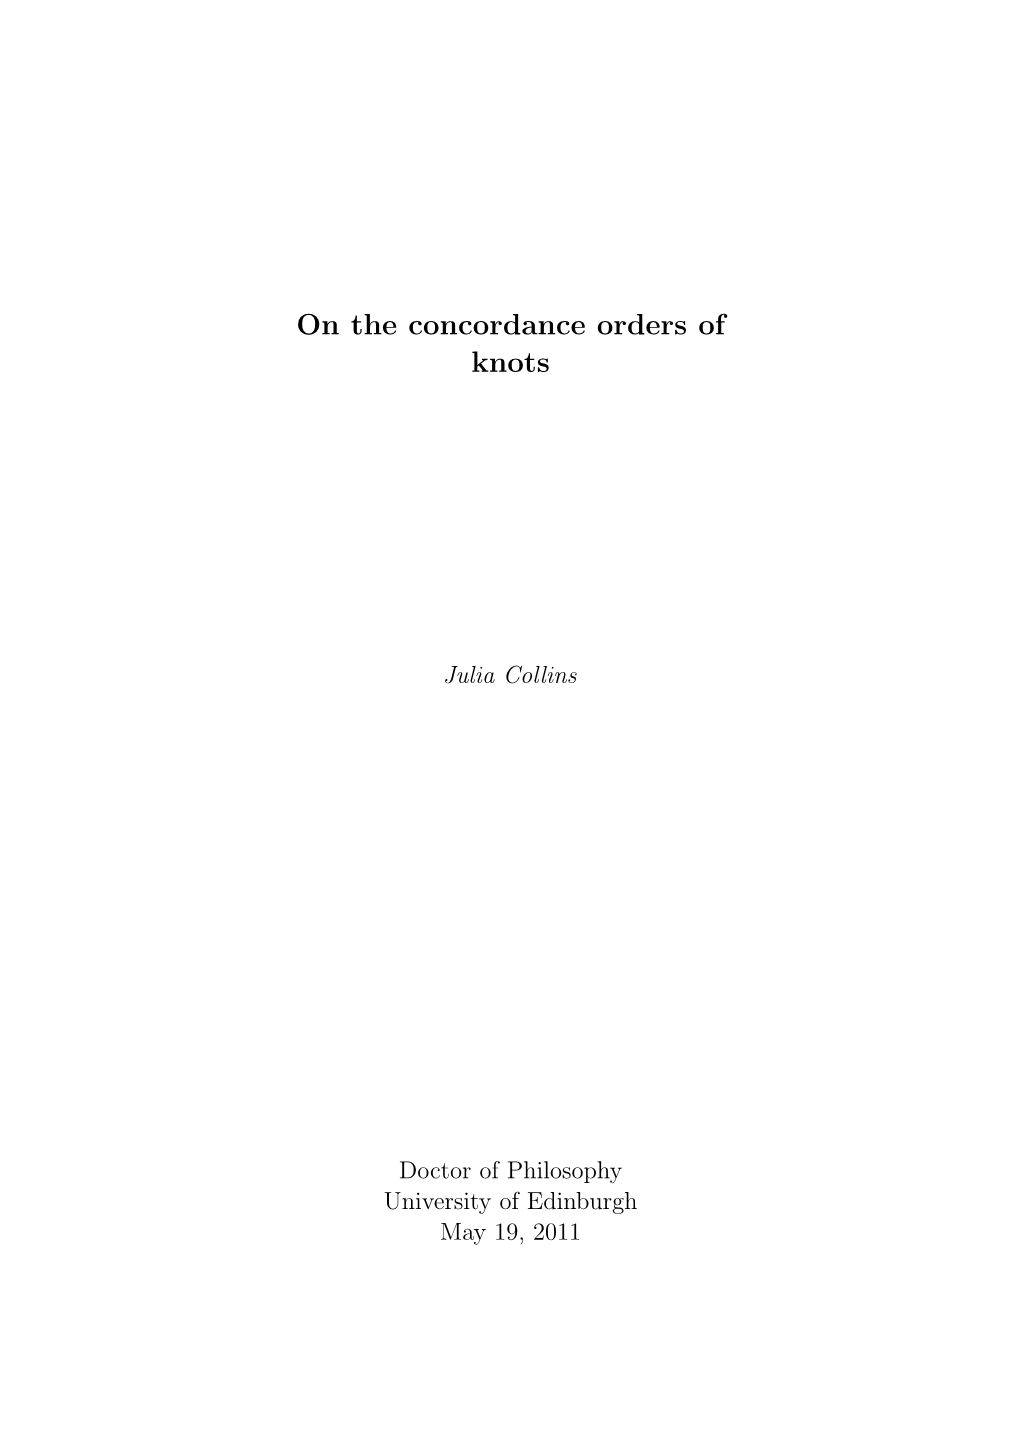 On the Concordance Orders of Knots